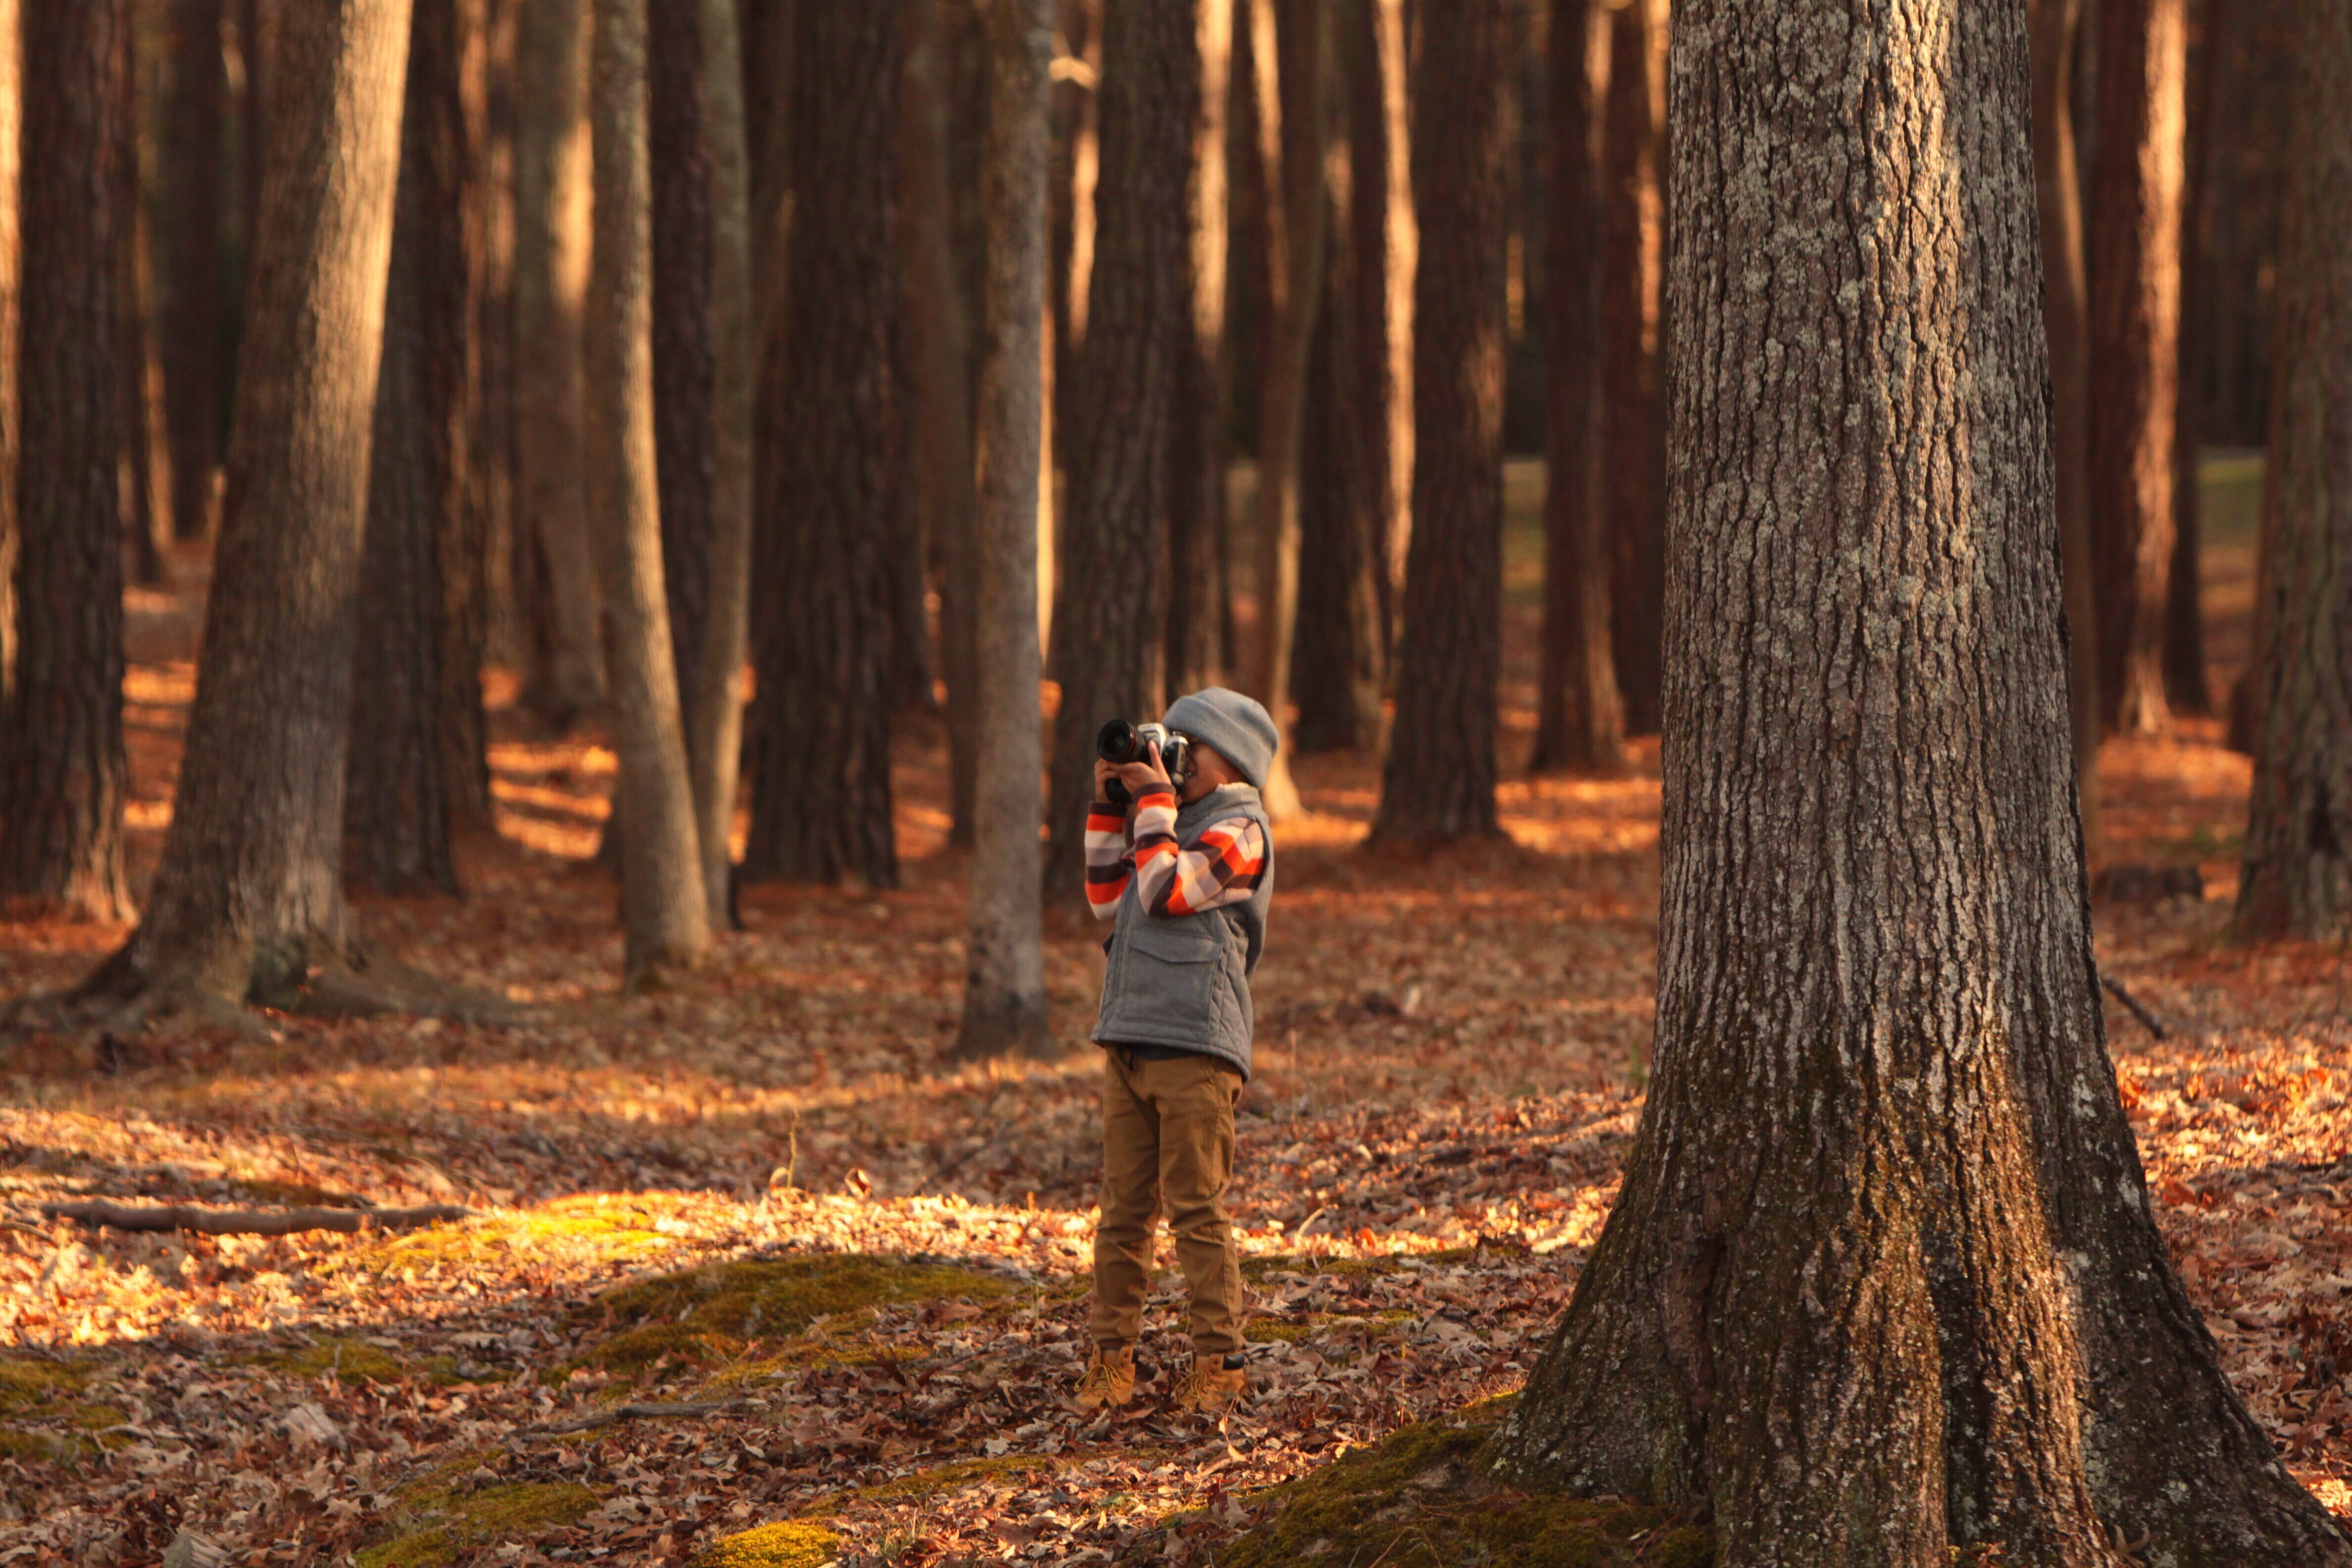 Getting your children interested in photography can be exciting for the both of you!